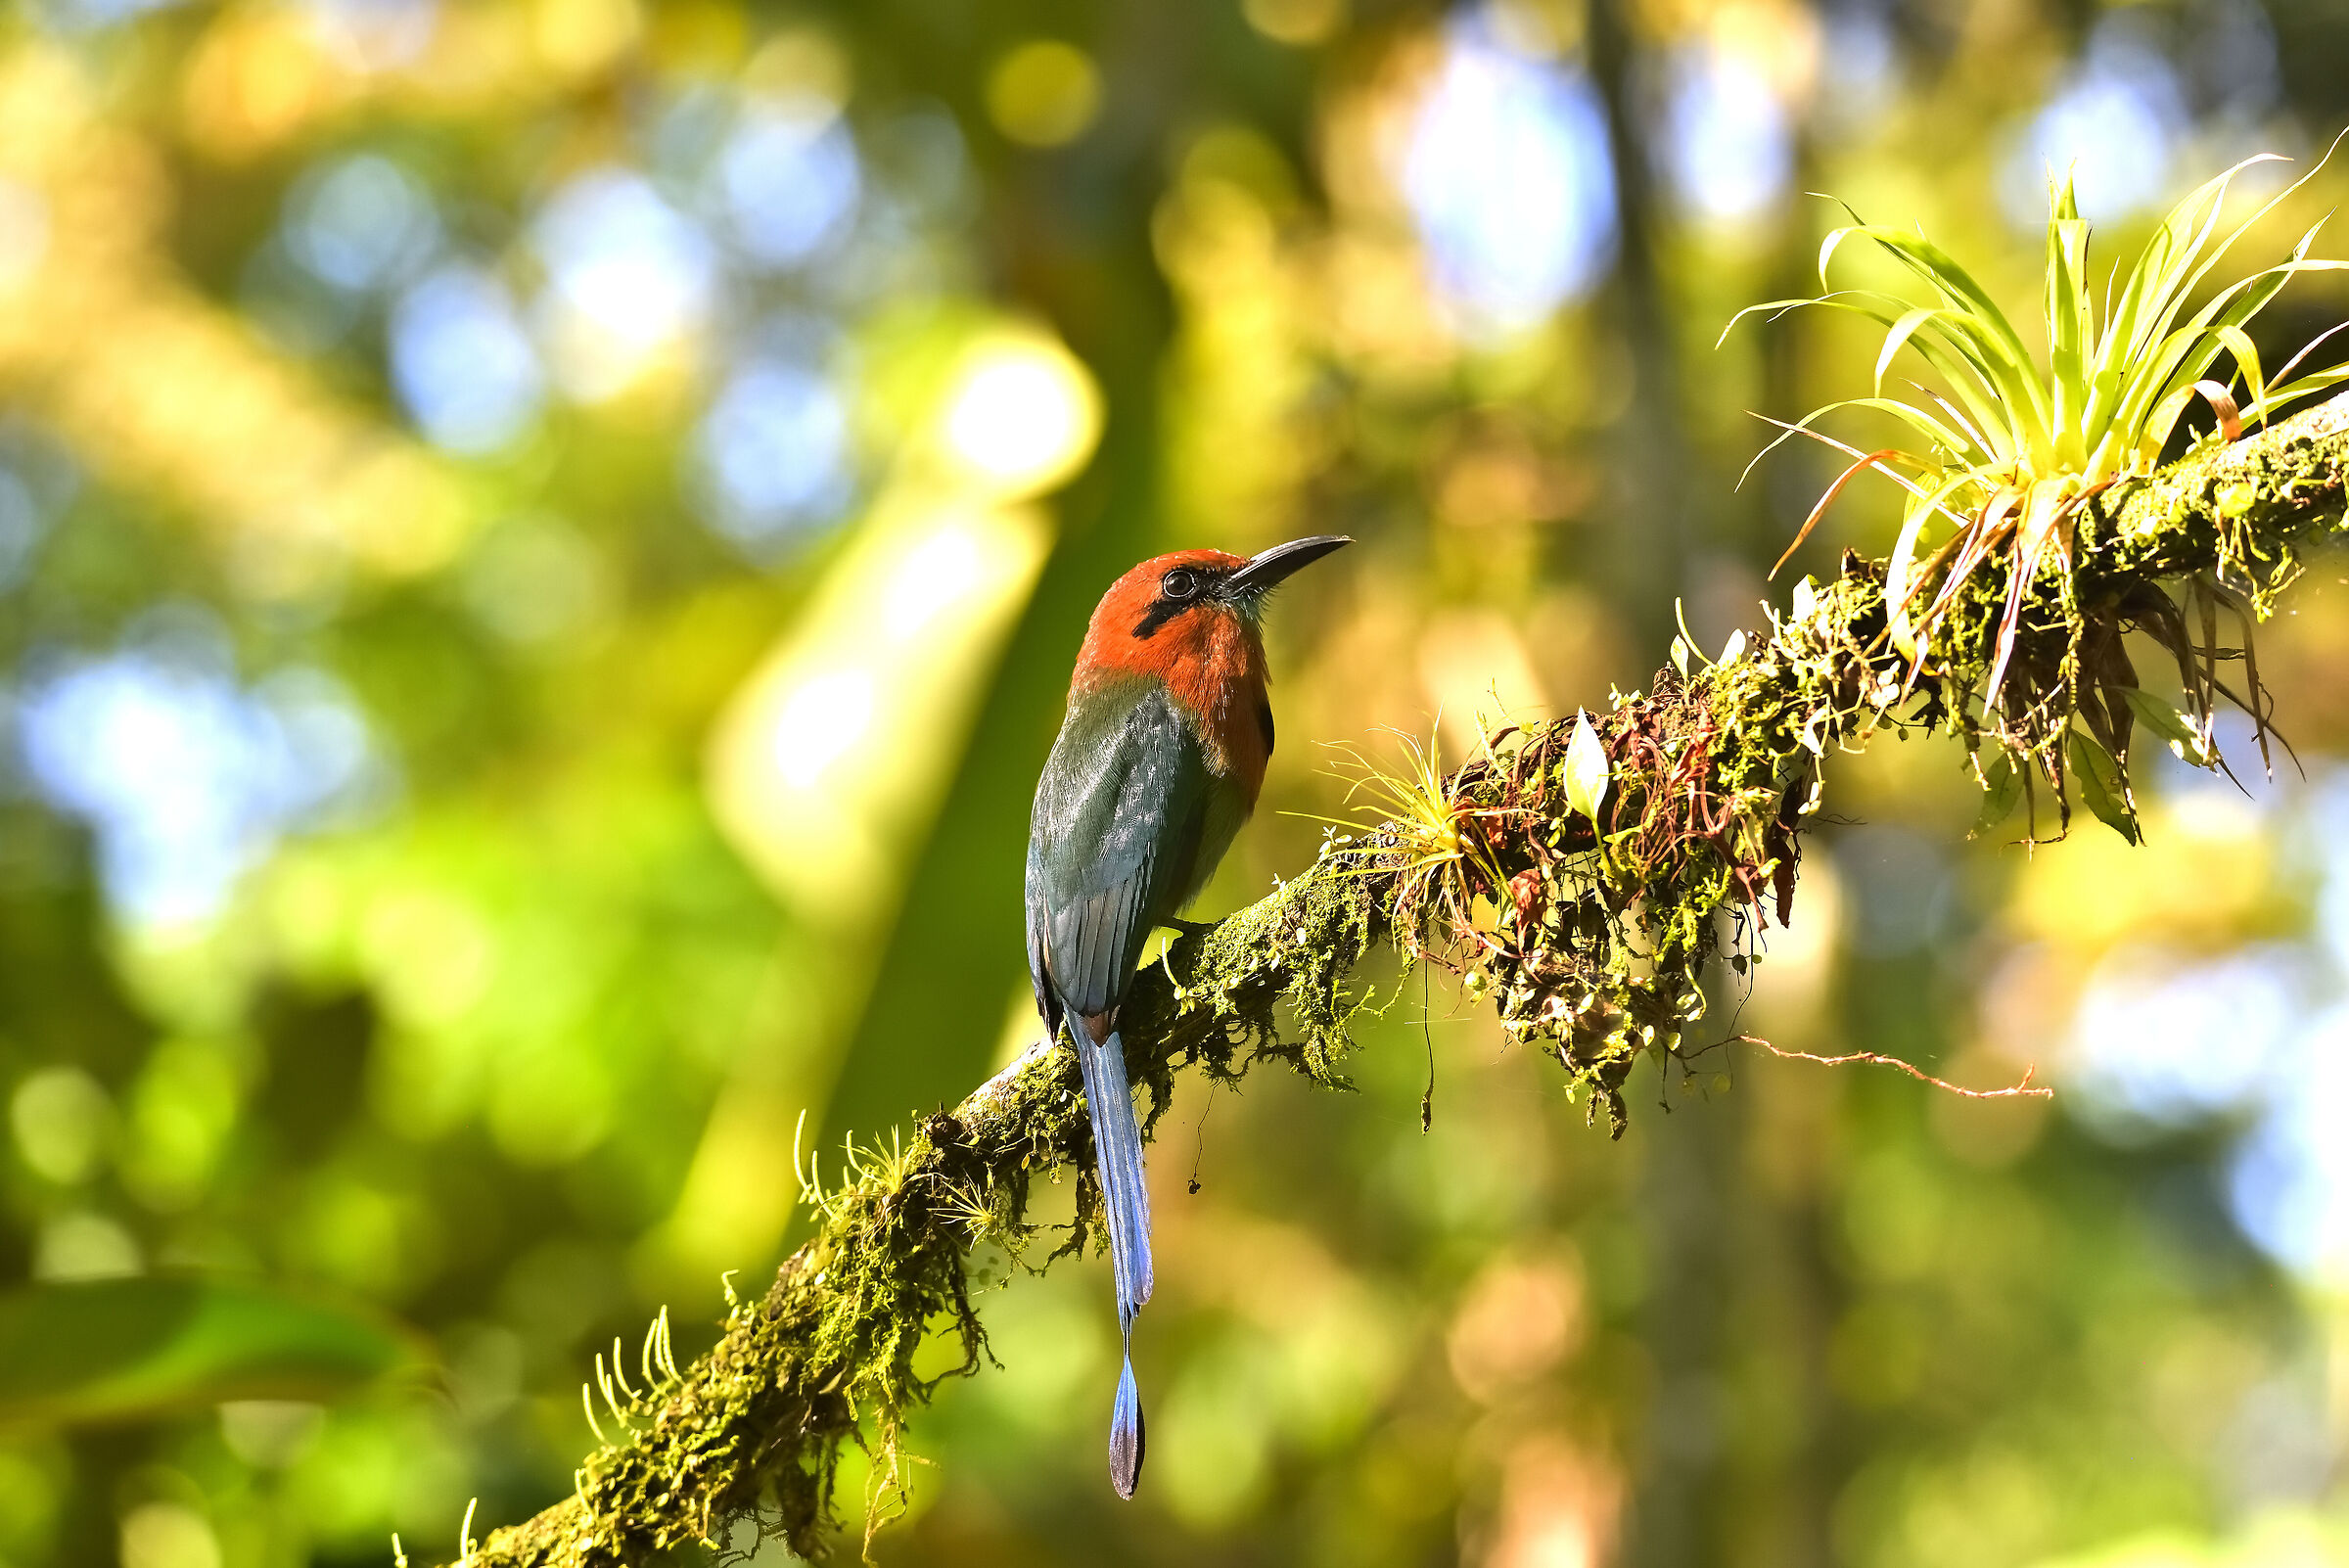 Photographic workshop in search of the splendid Motmot...